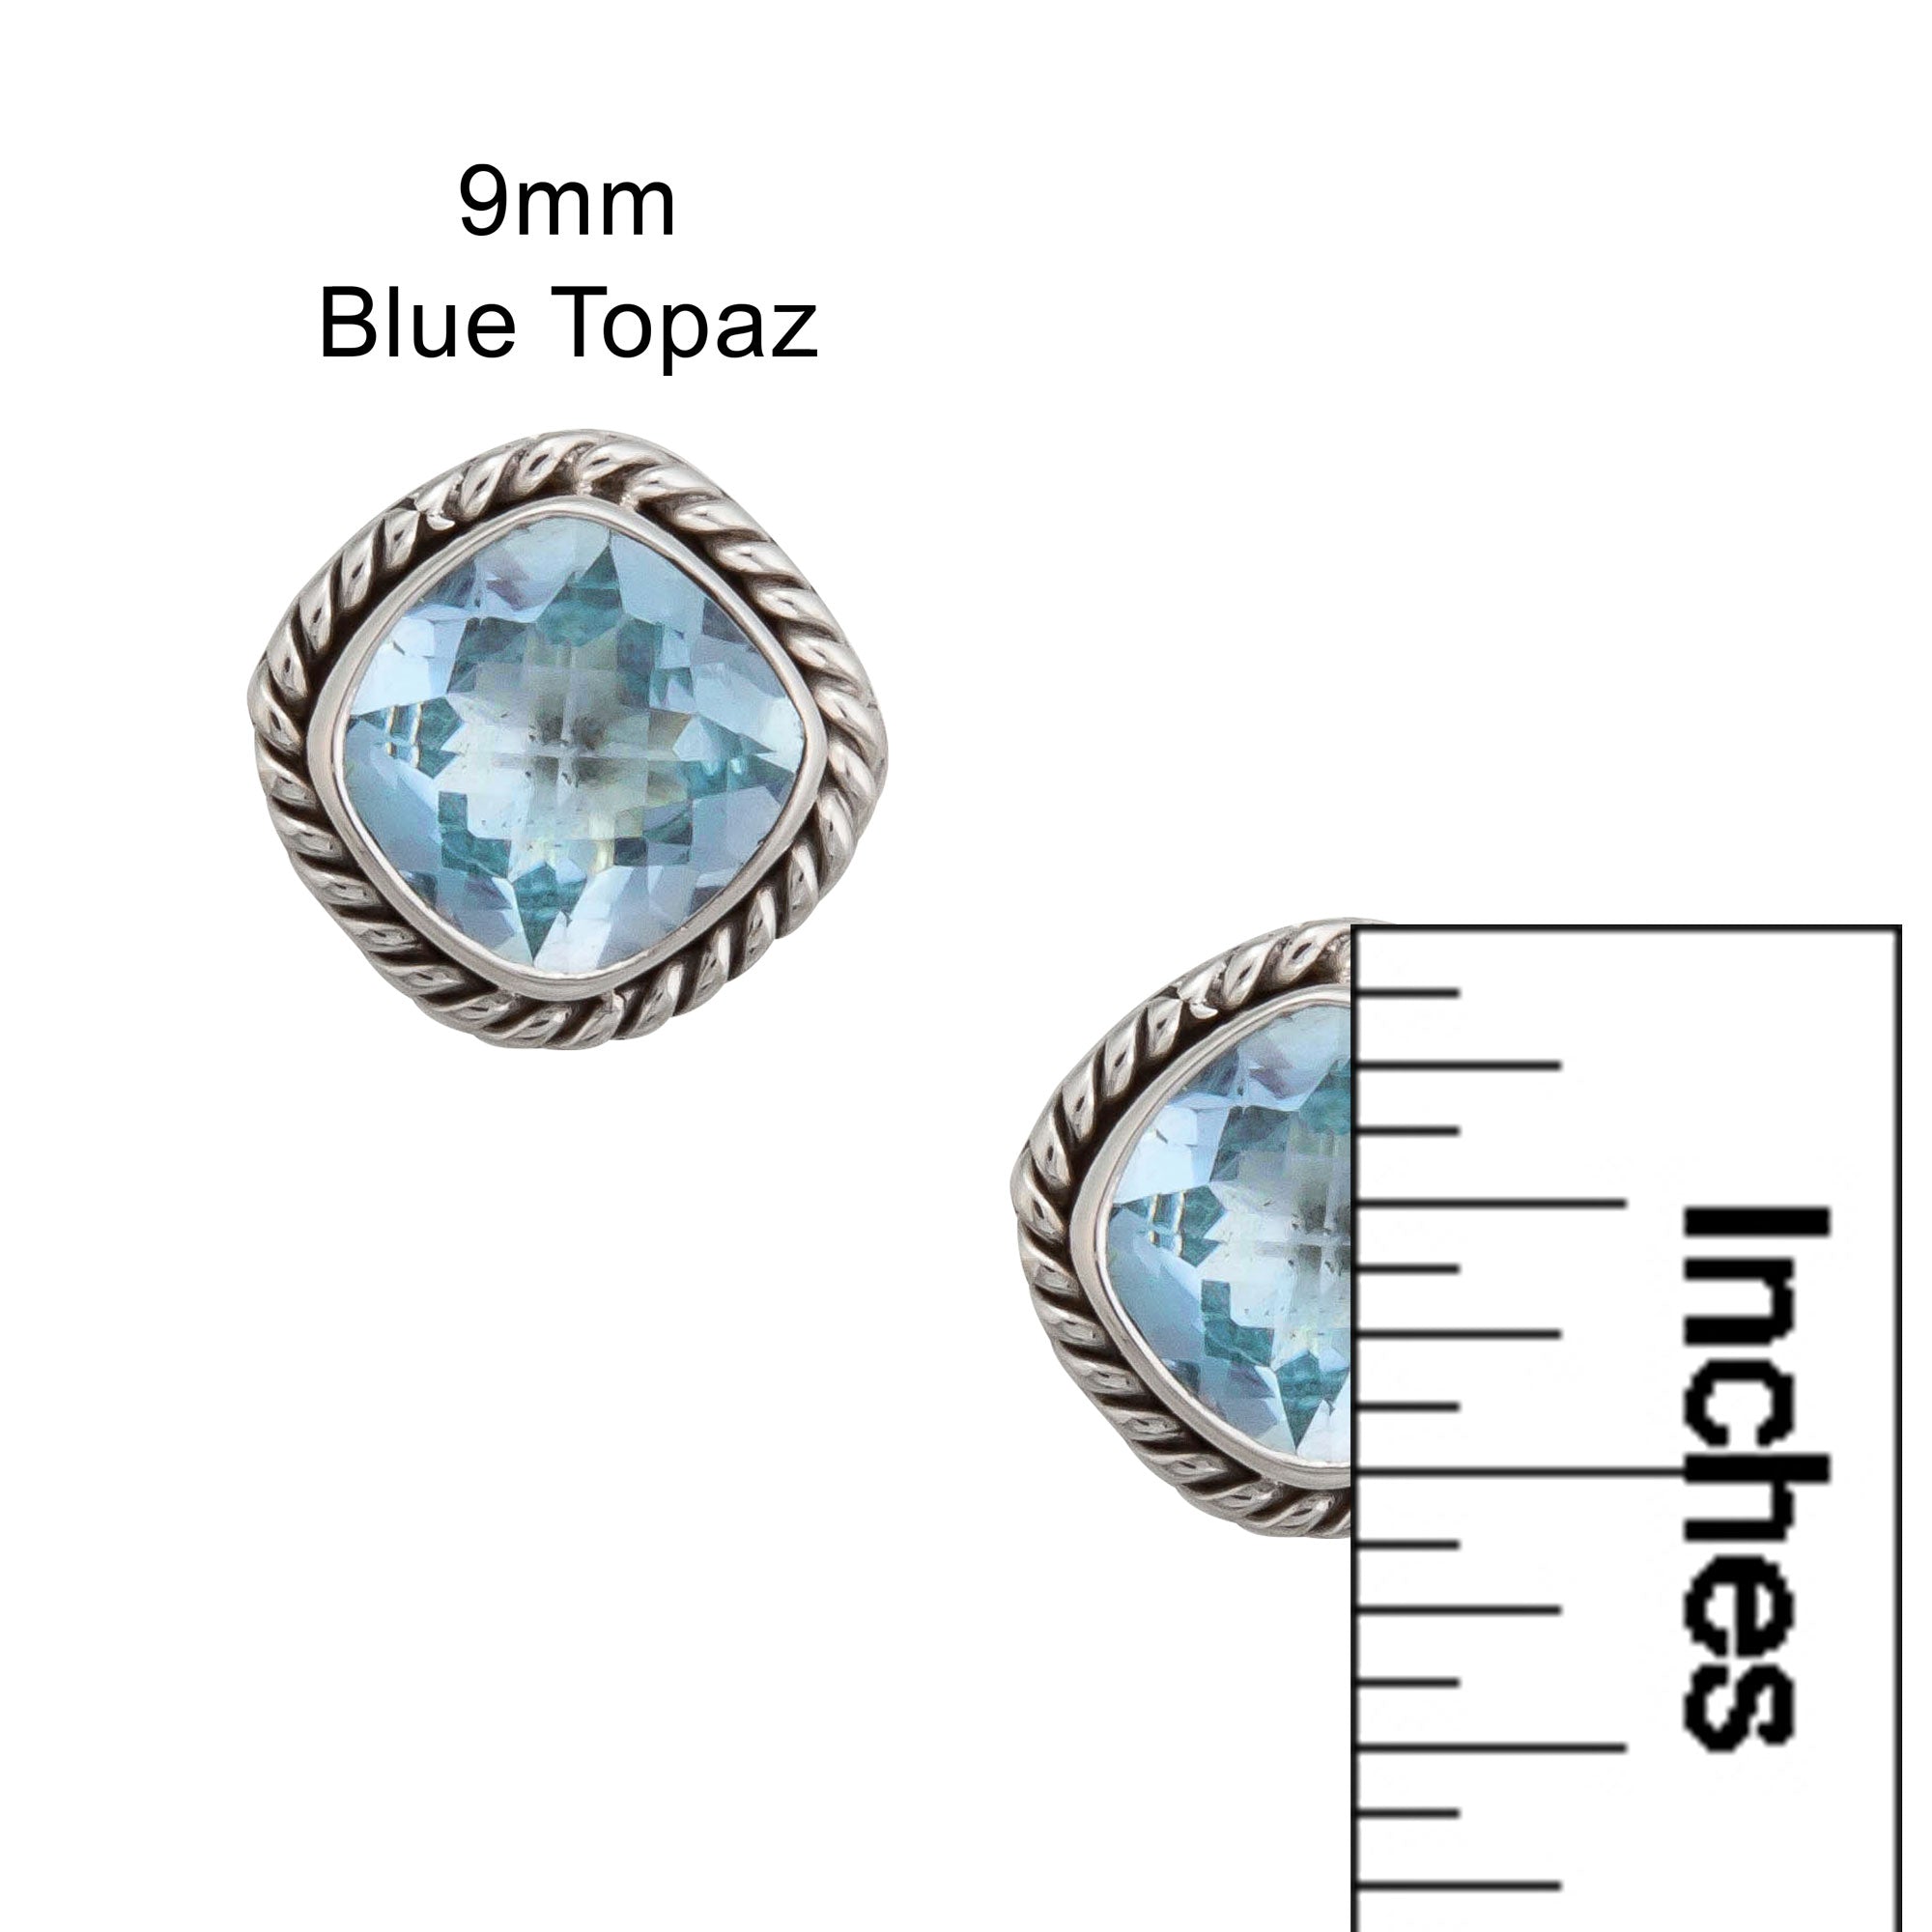 Sterling Silver Blue Topaz Post Earrings with Detailed Edge | Charles Albert Jewelry